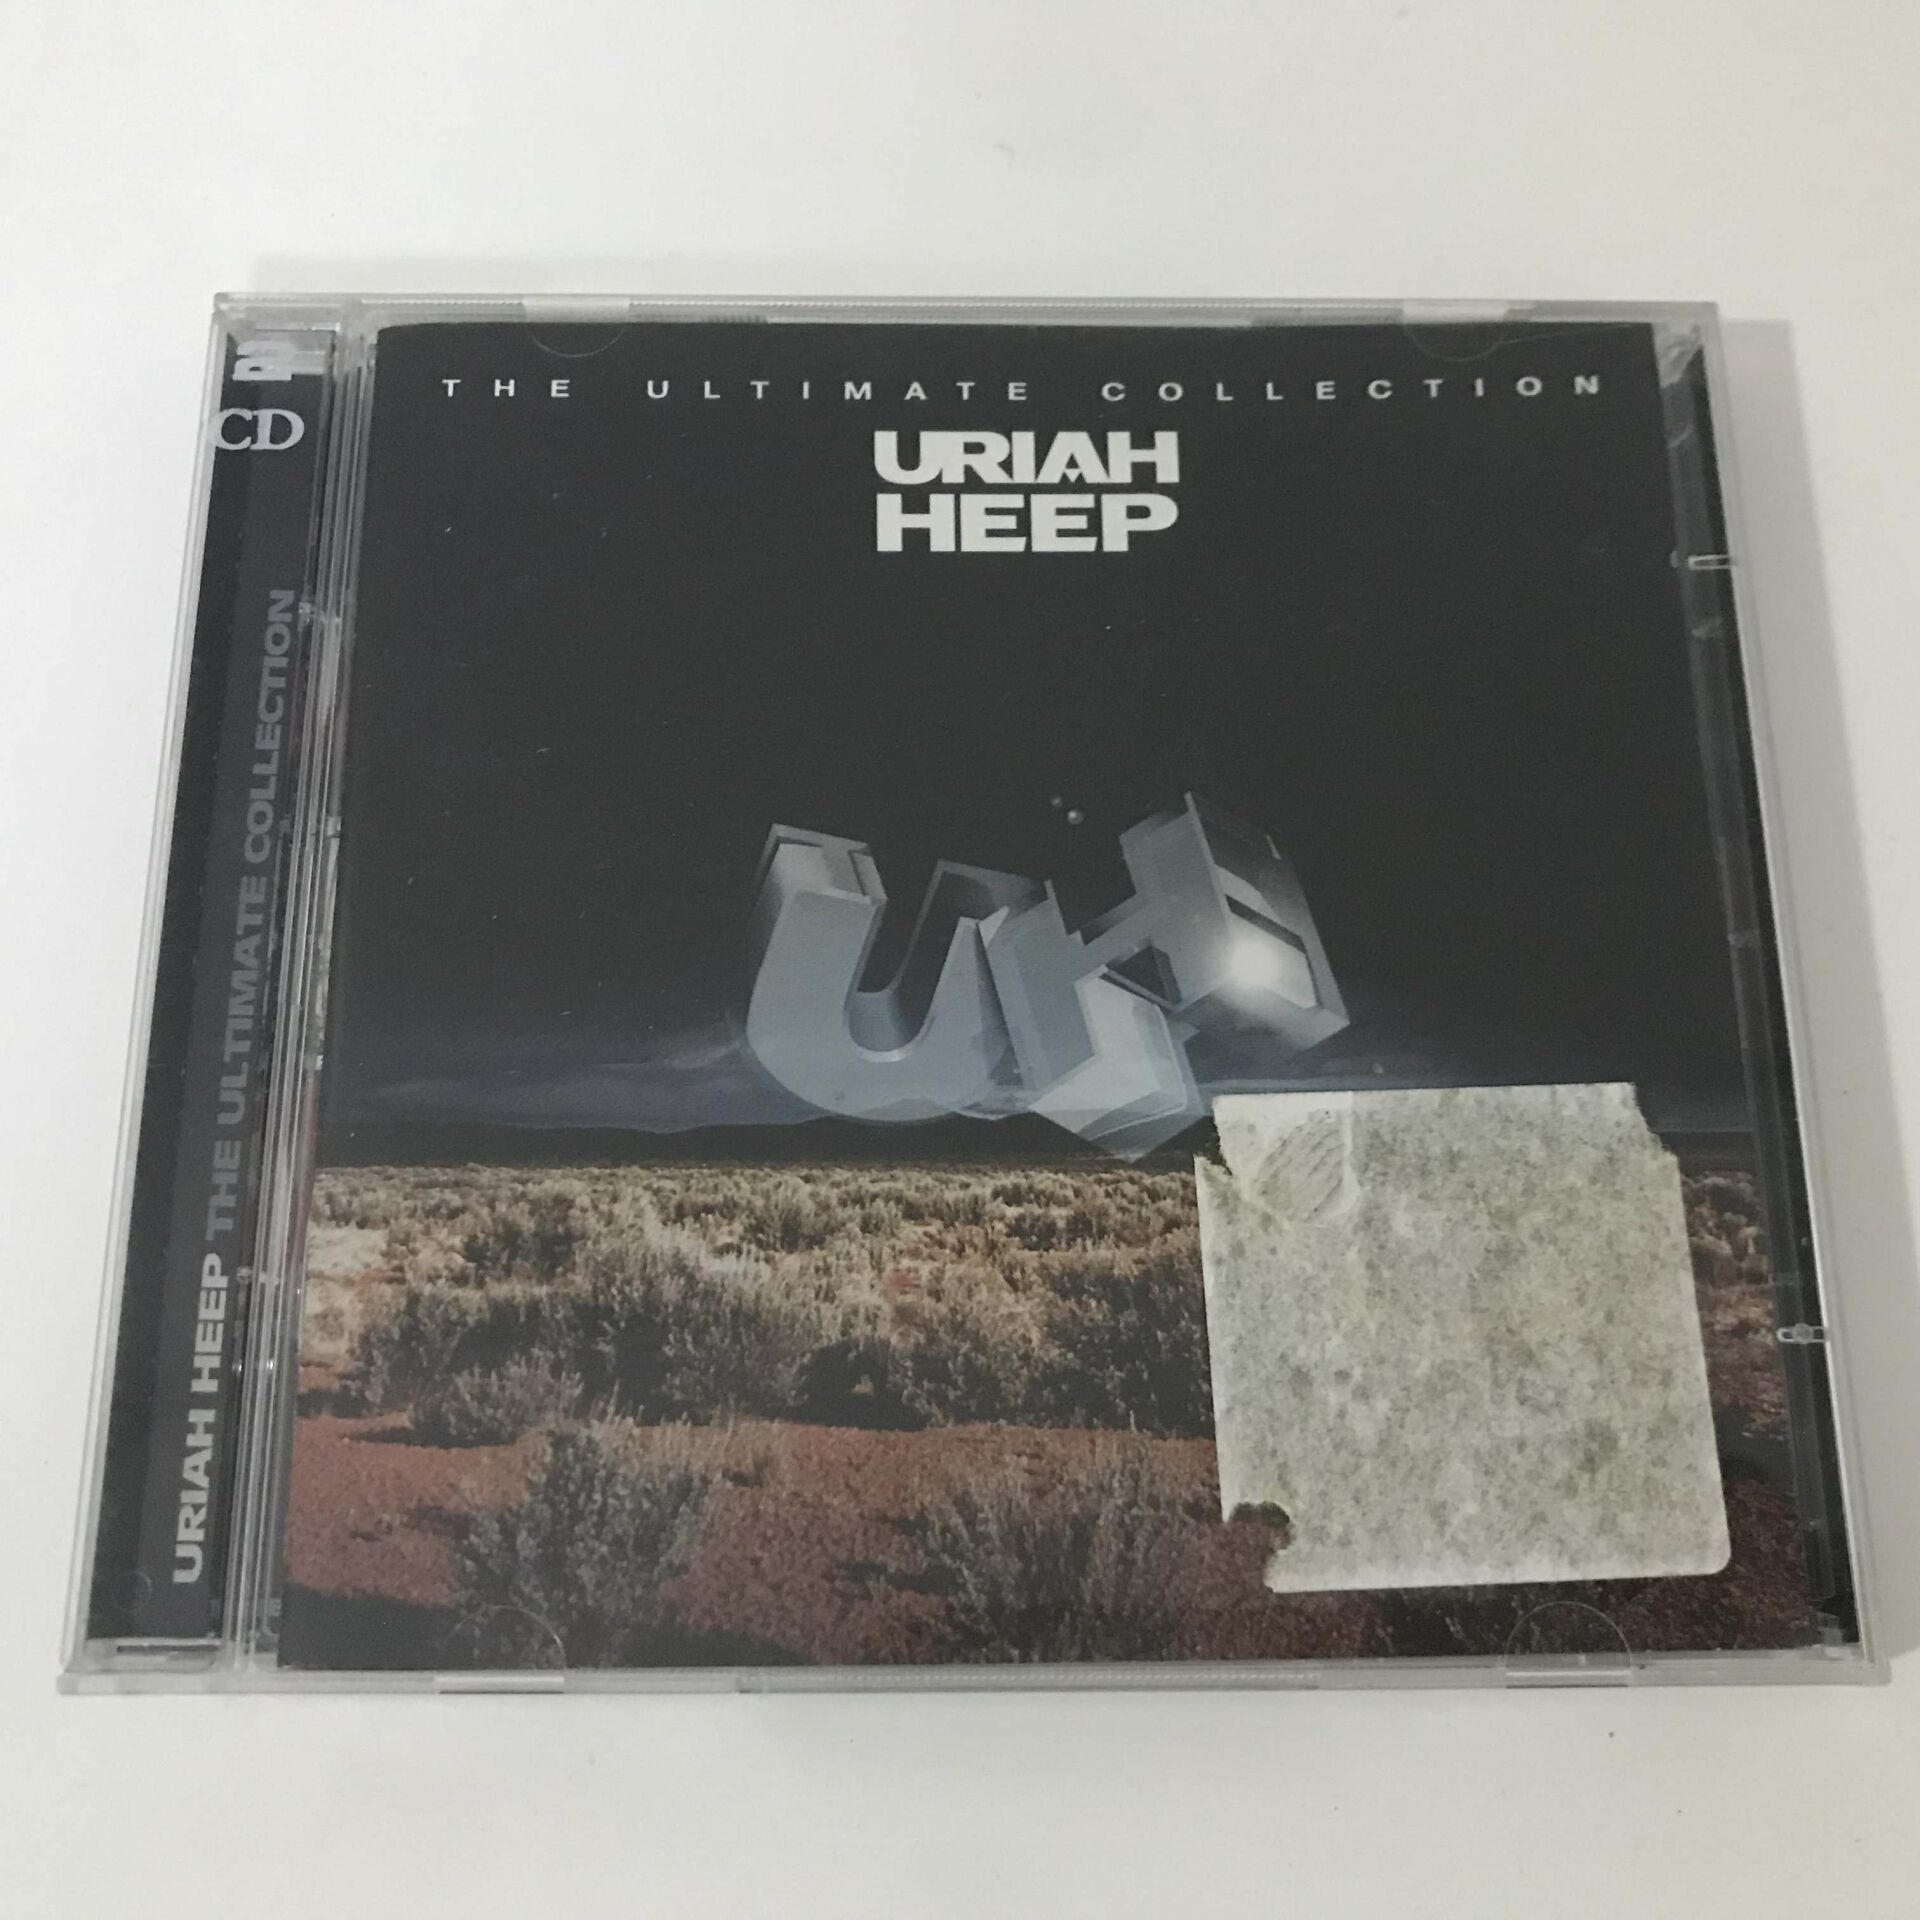 Uriah Heep – The Ultimate Collection 2 CD